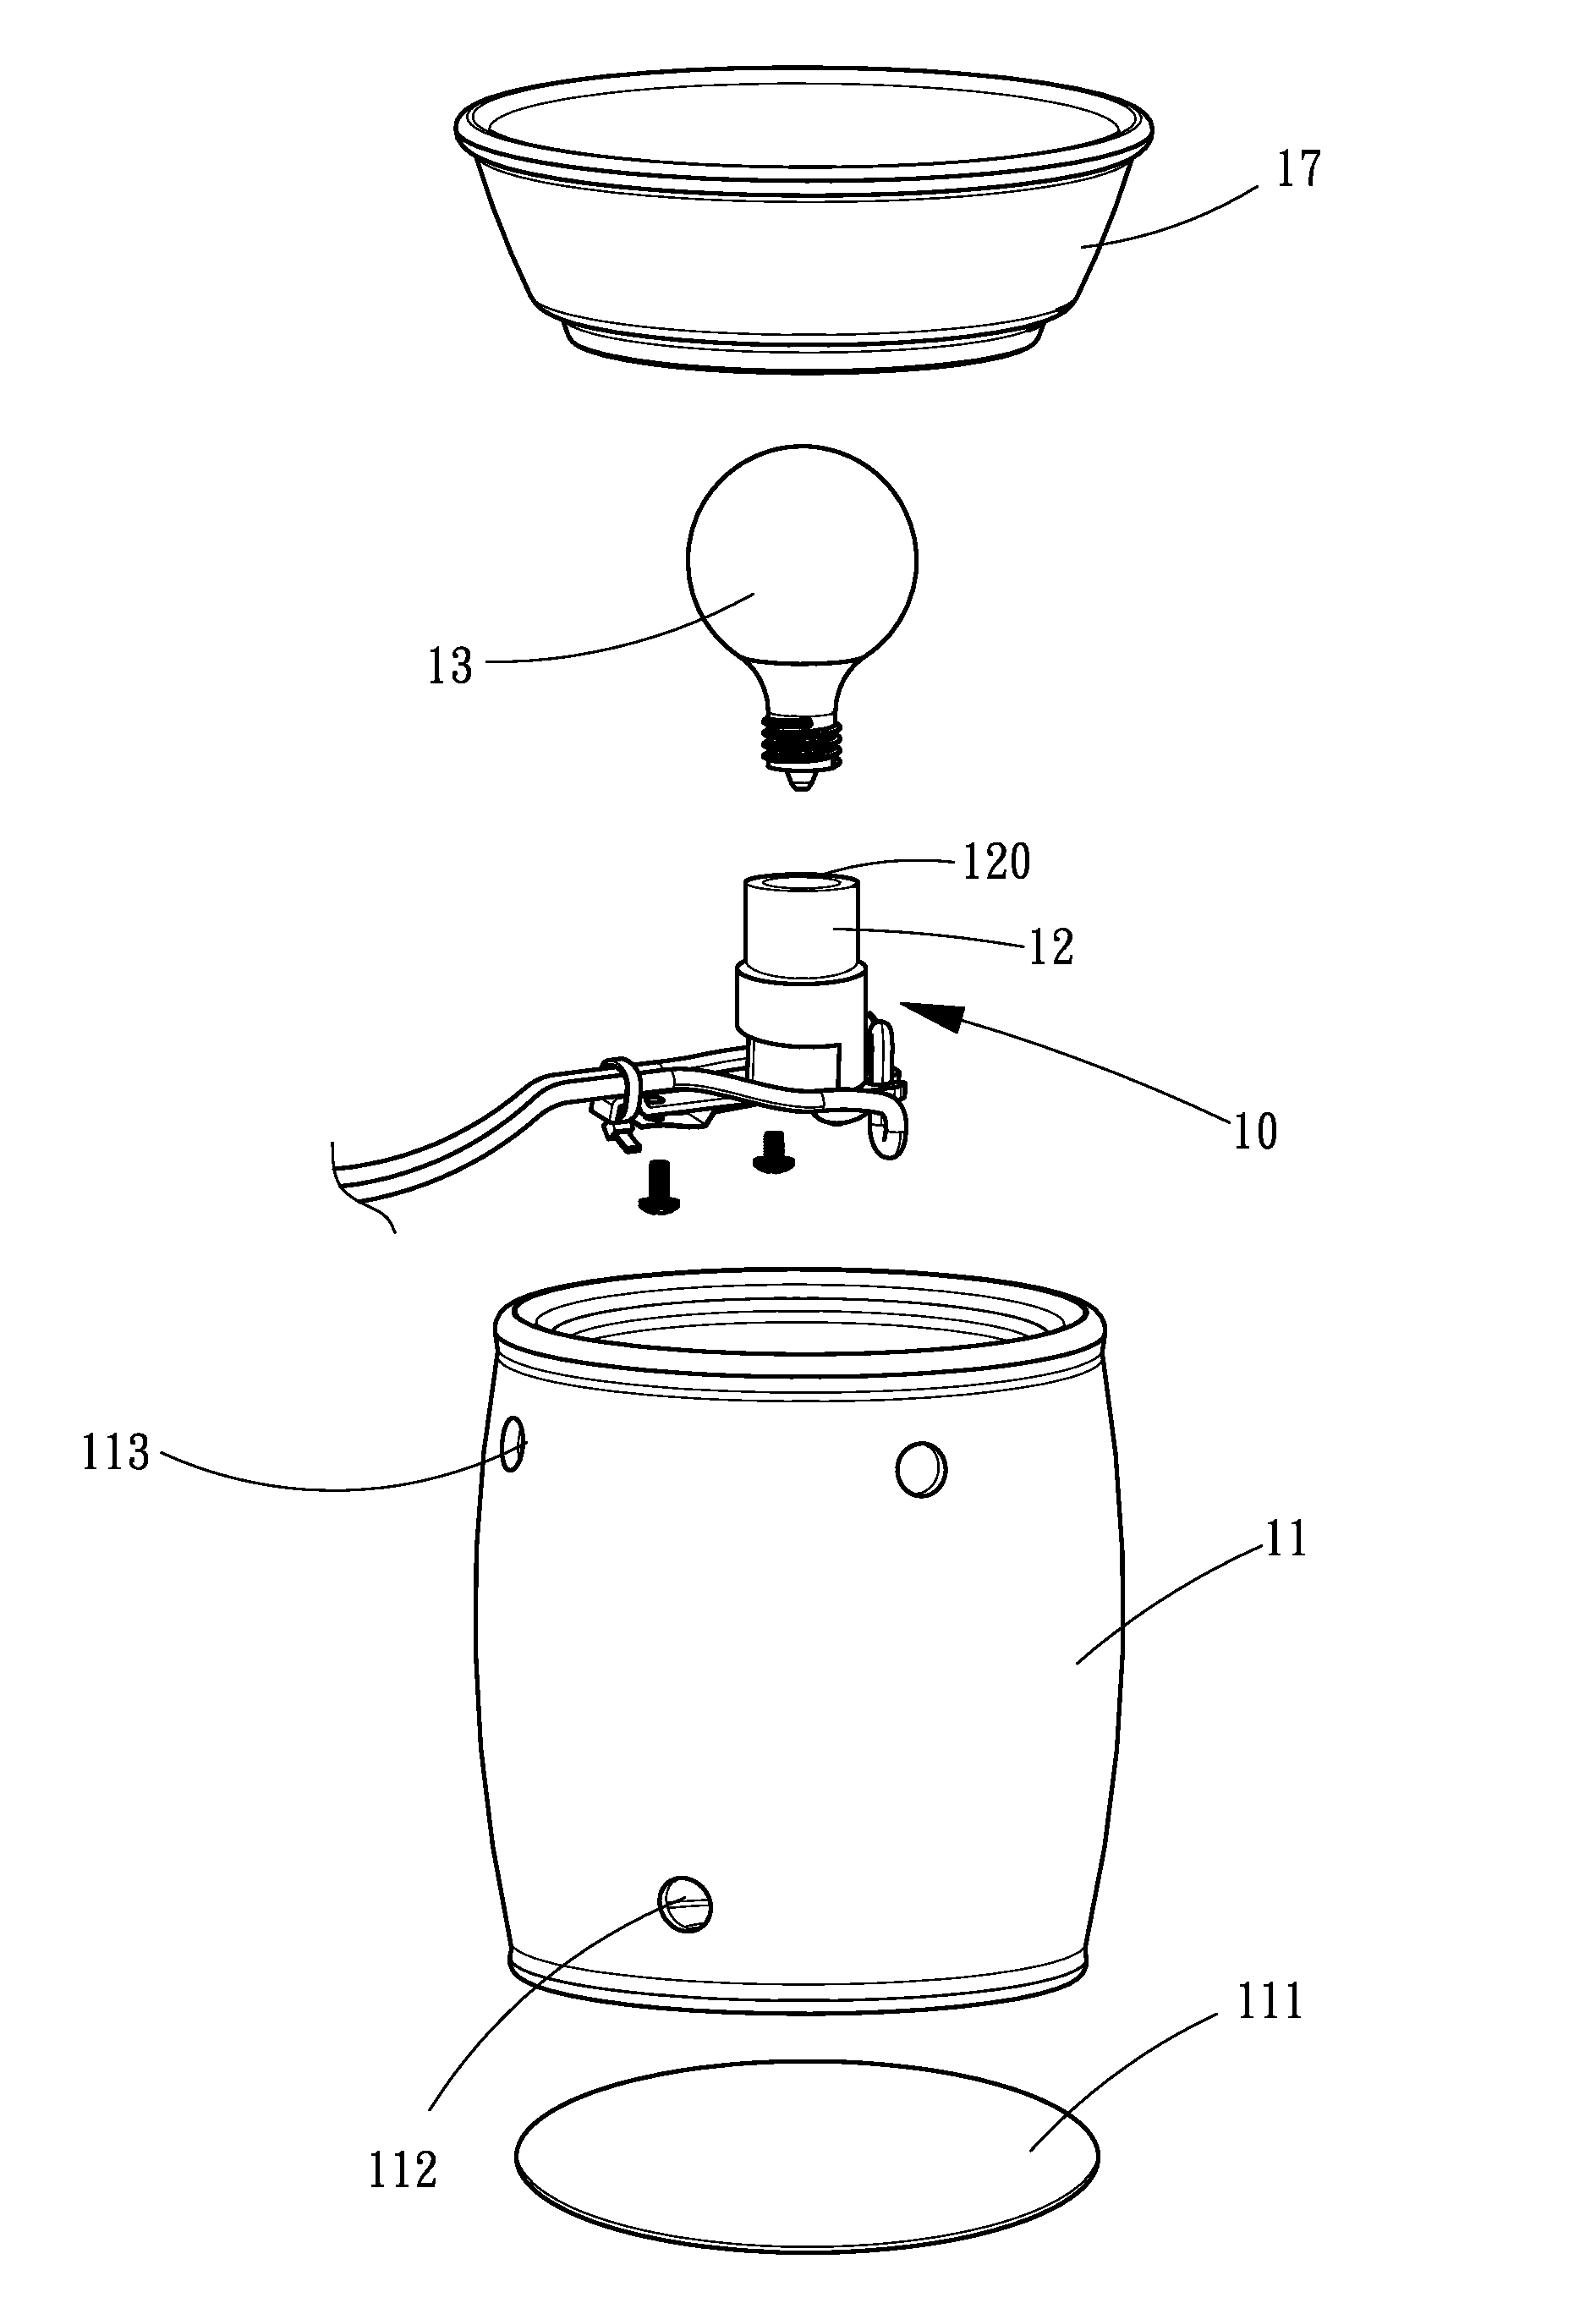 Lamp-based scent releasing system